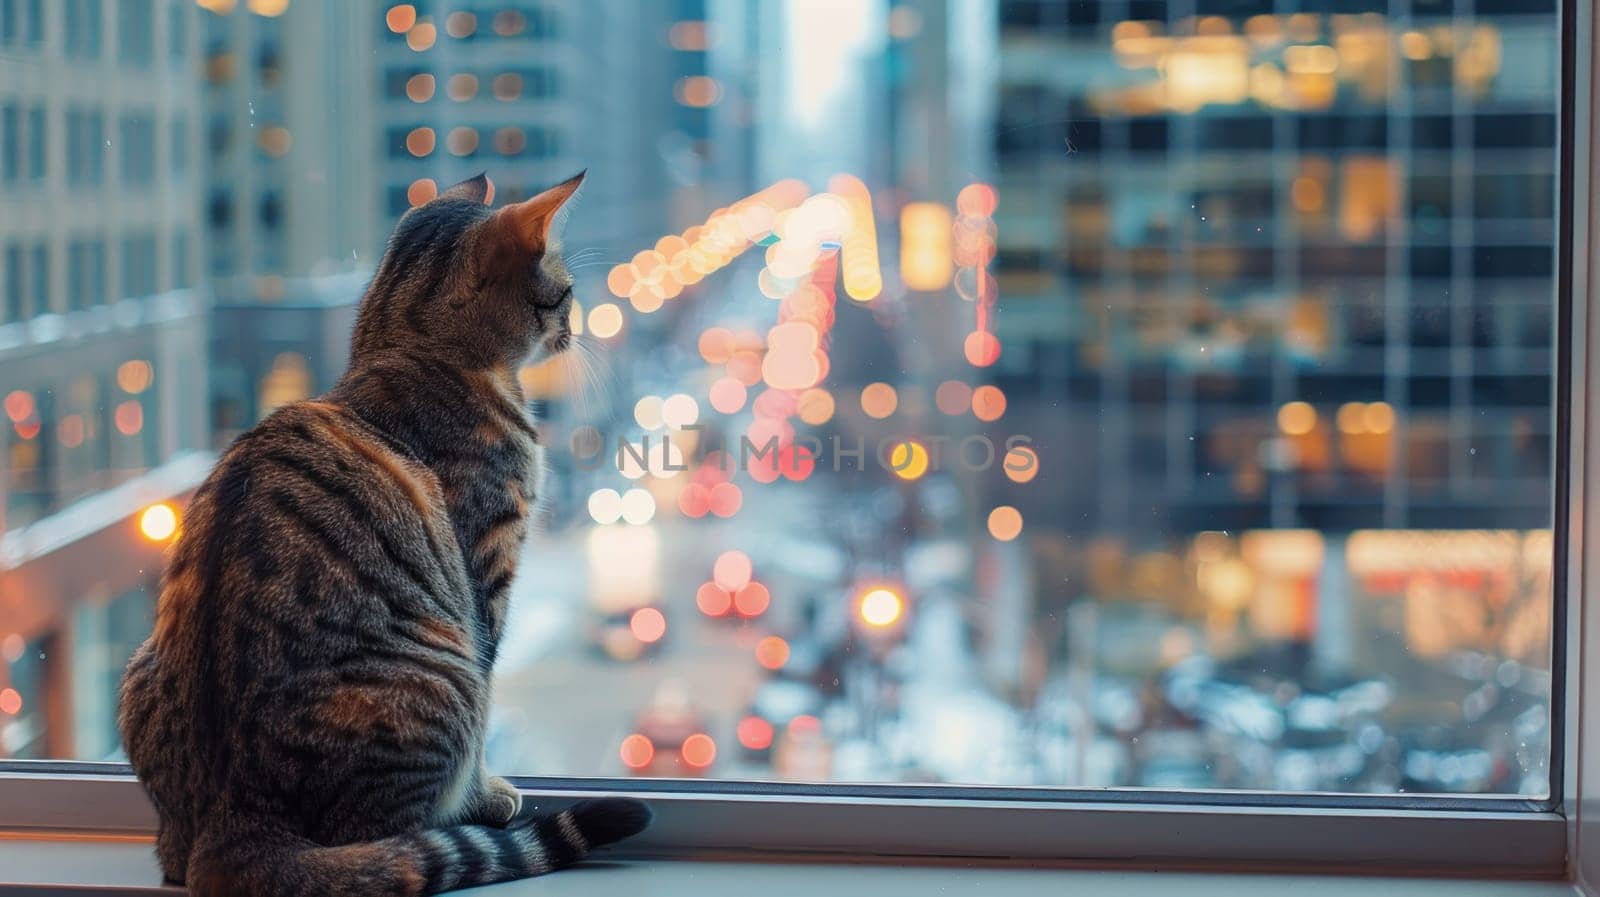 A cat is sitting by a window looking out at the city. The cat is looking at the lights and cars outside. The scene is calm and peaceful, with the cat enjoying the view of the city